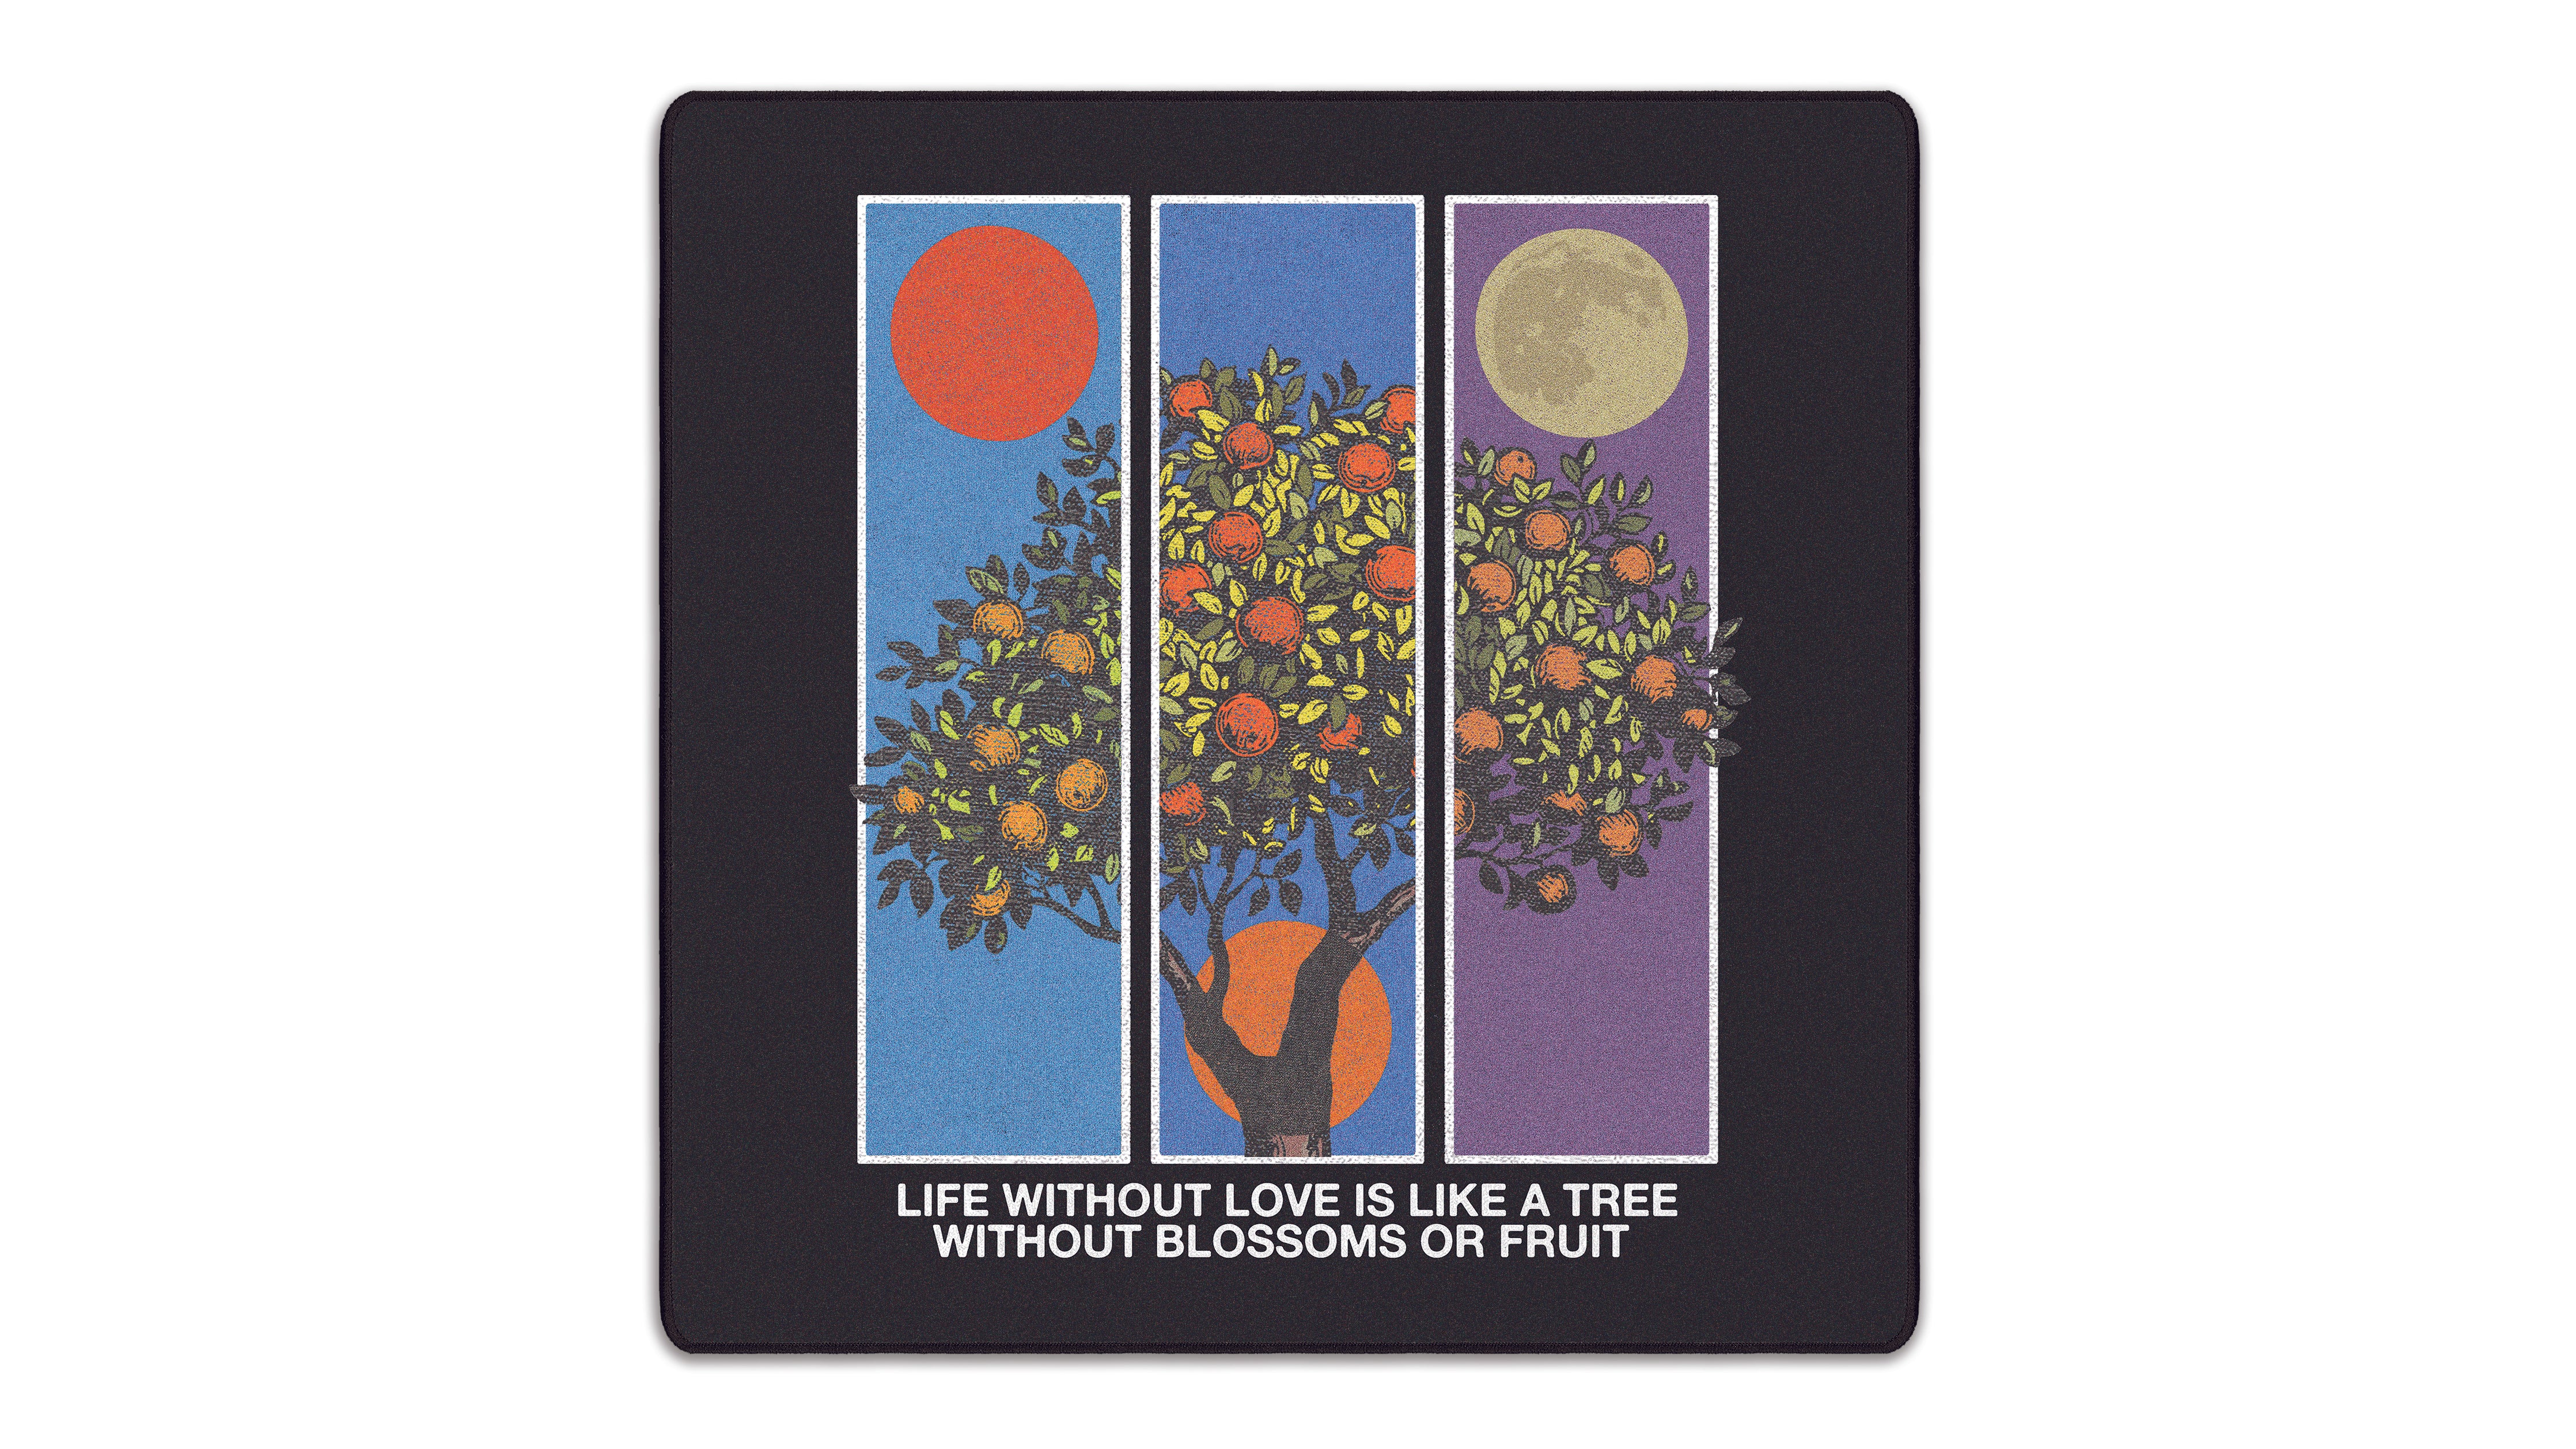 Life without Love by OZGMX - The Mousepad Company